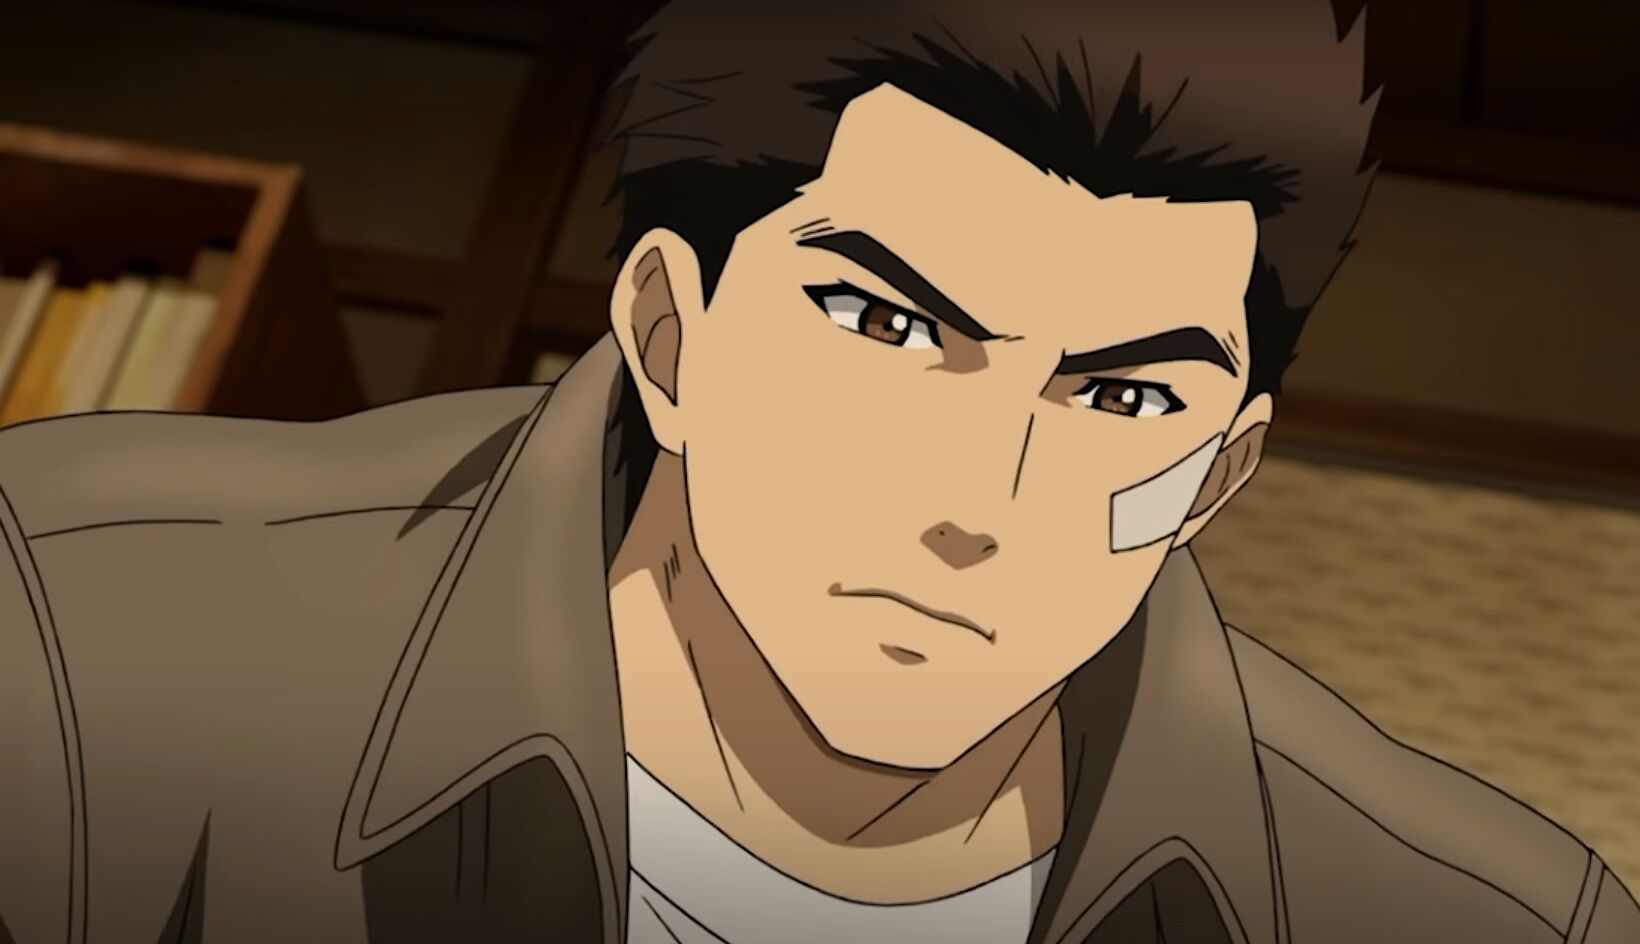 Shenmue The Animation has been canceled after its first season